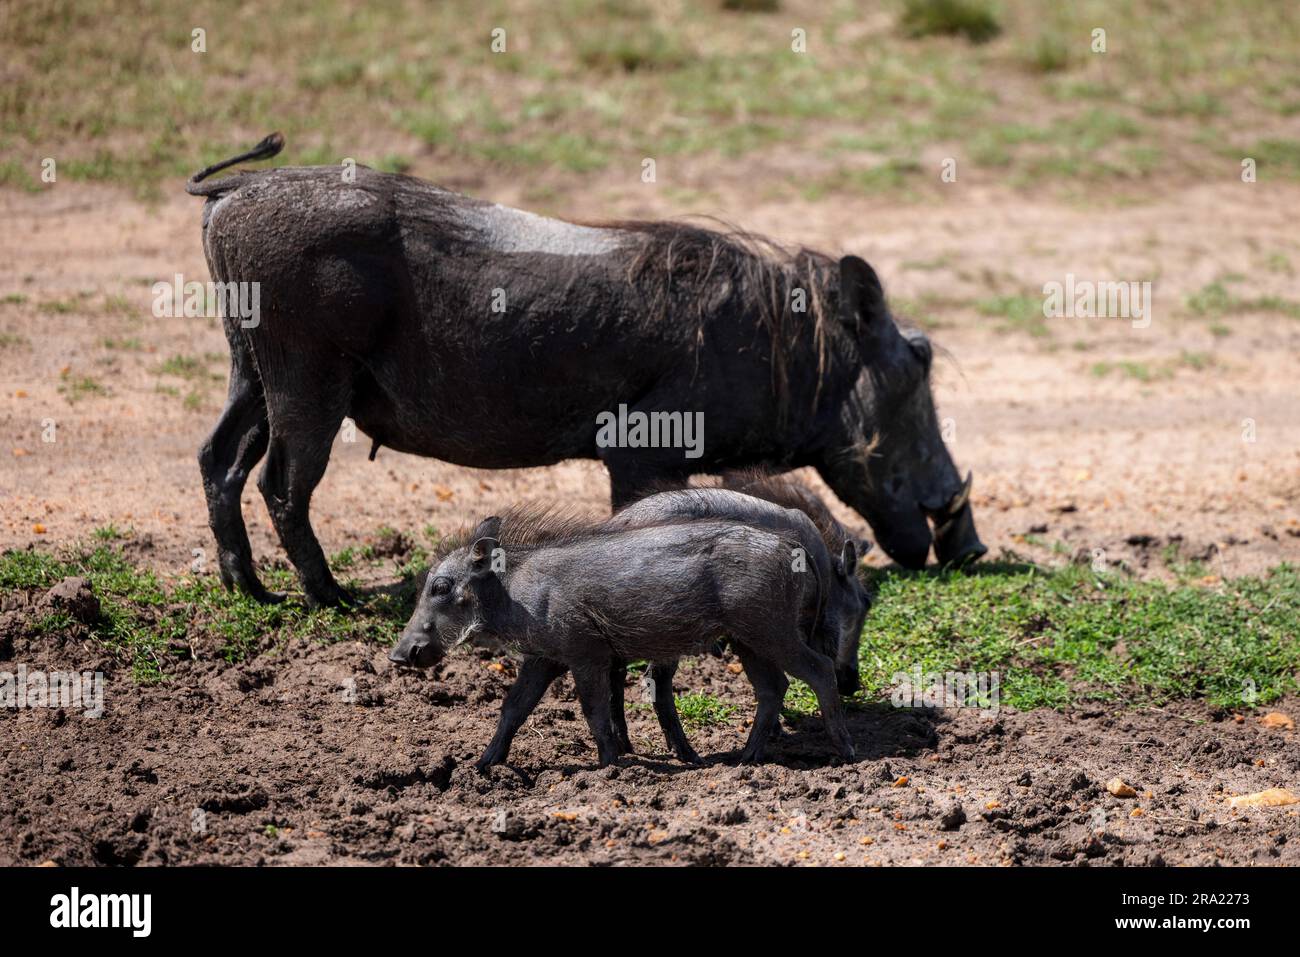 Adorable black warthogs standing in a dirt field with a patch of lush green grass in the background Stock Photo